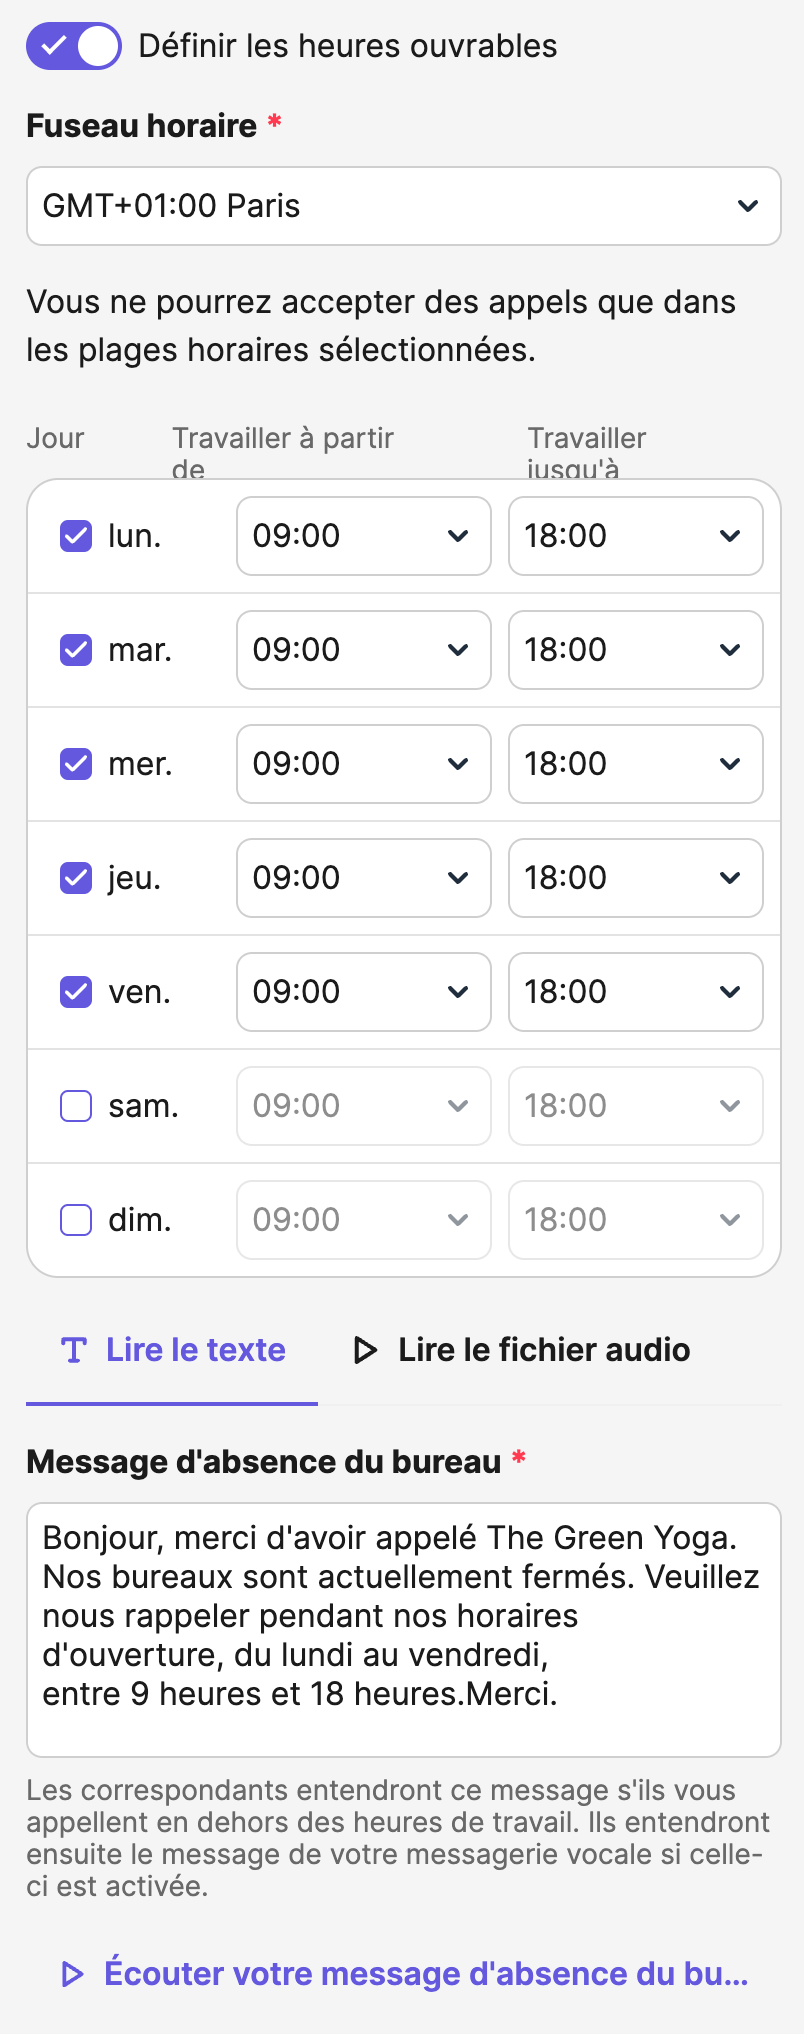 phone_working-hours_FR-FR.png